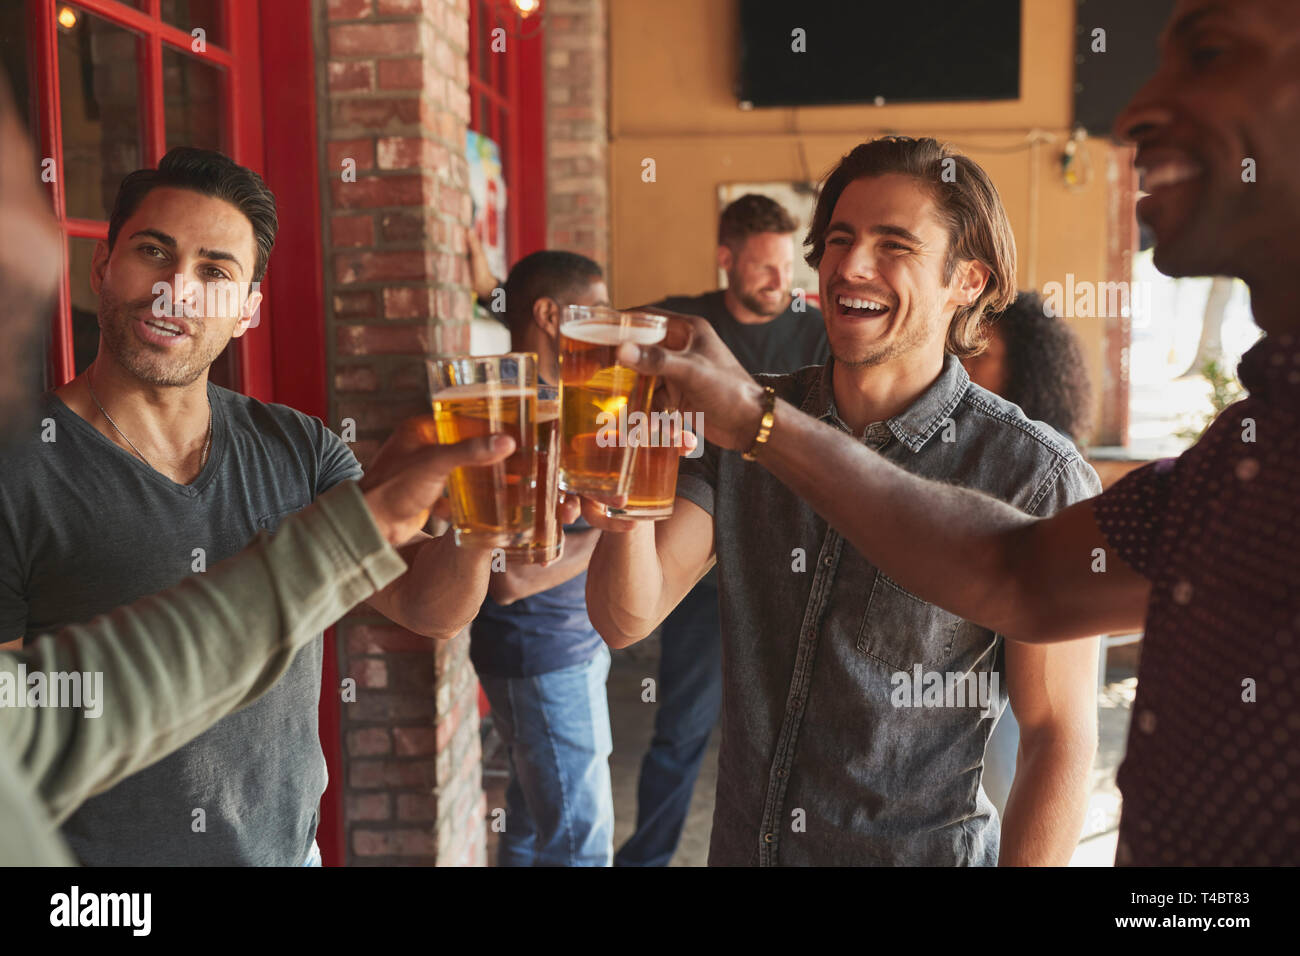 Group Of Male Friends Meeting In Sports Bar Making Toast Together Stock Photo